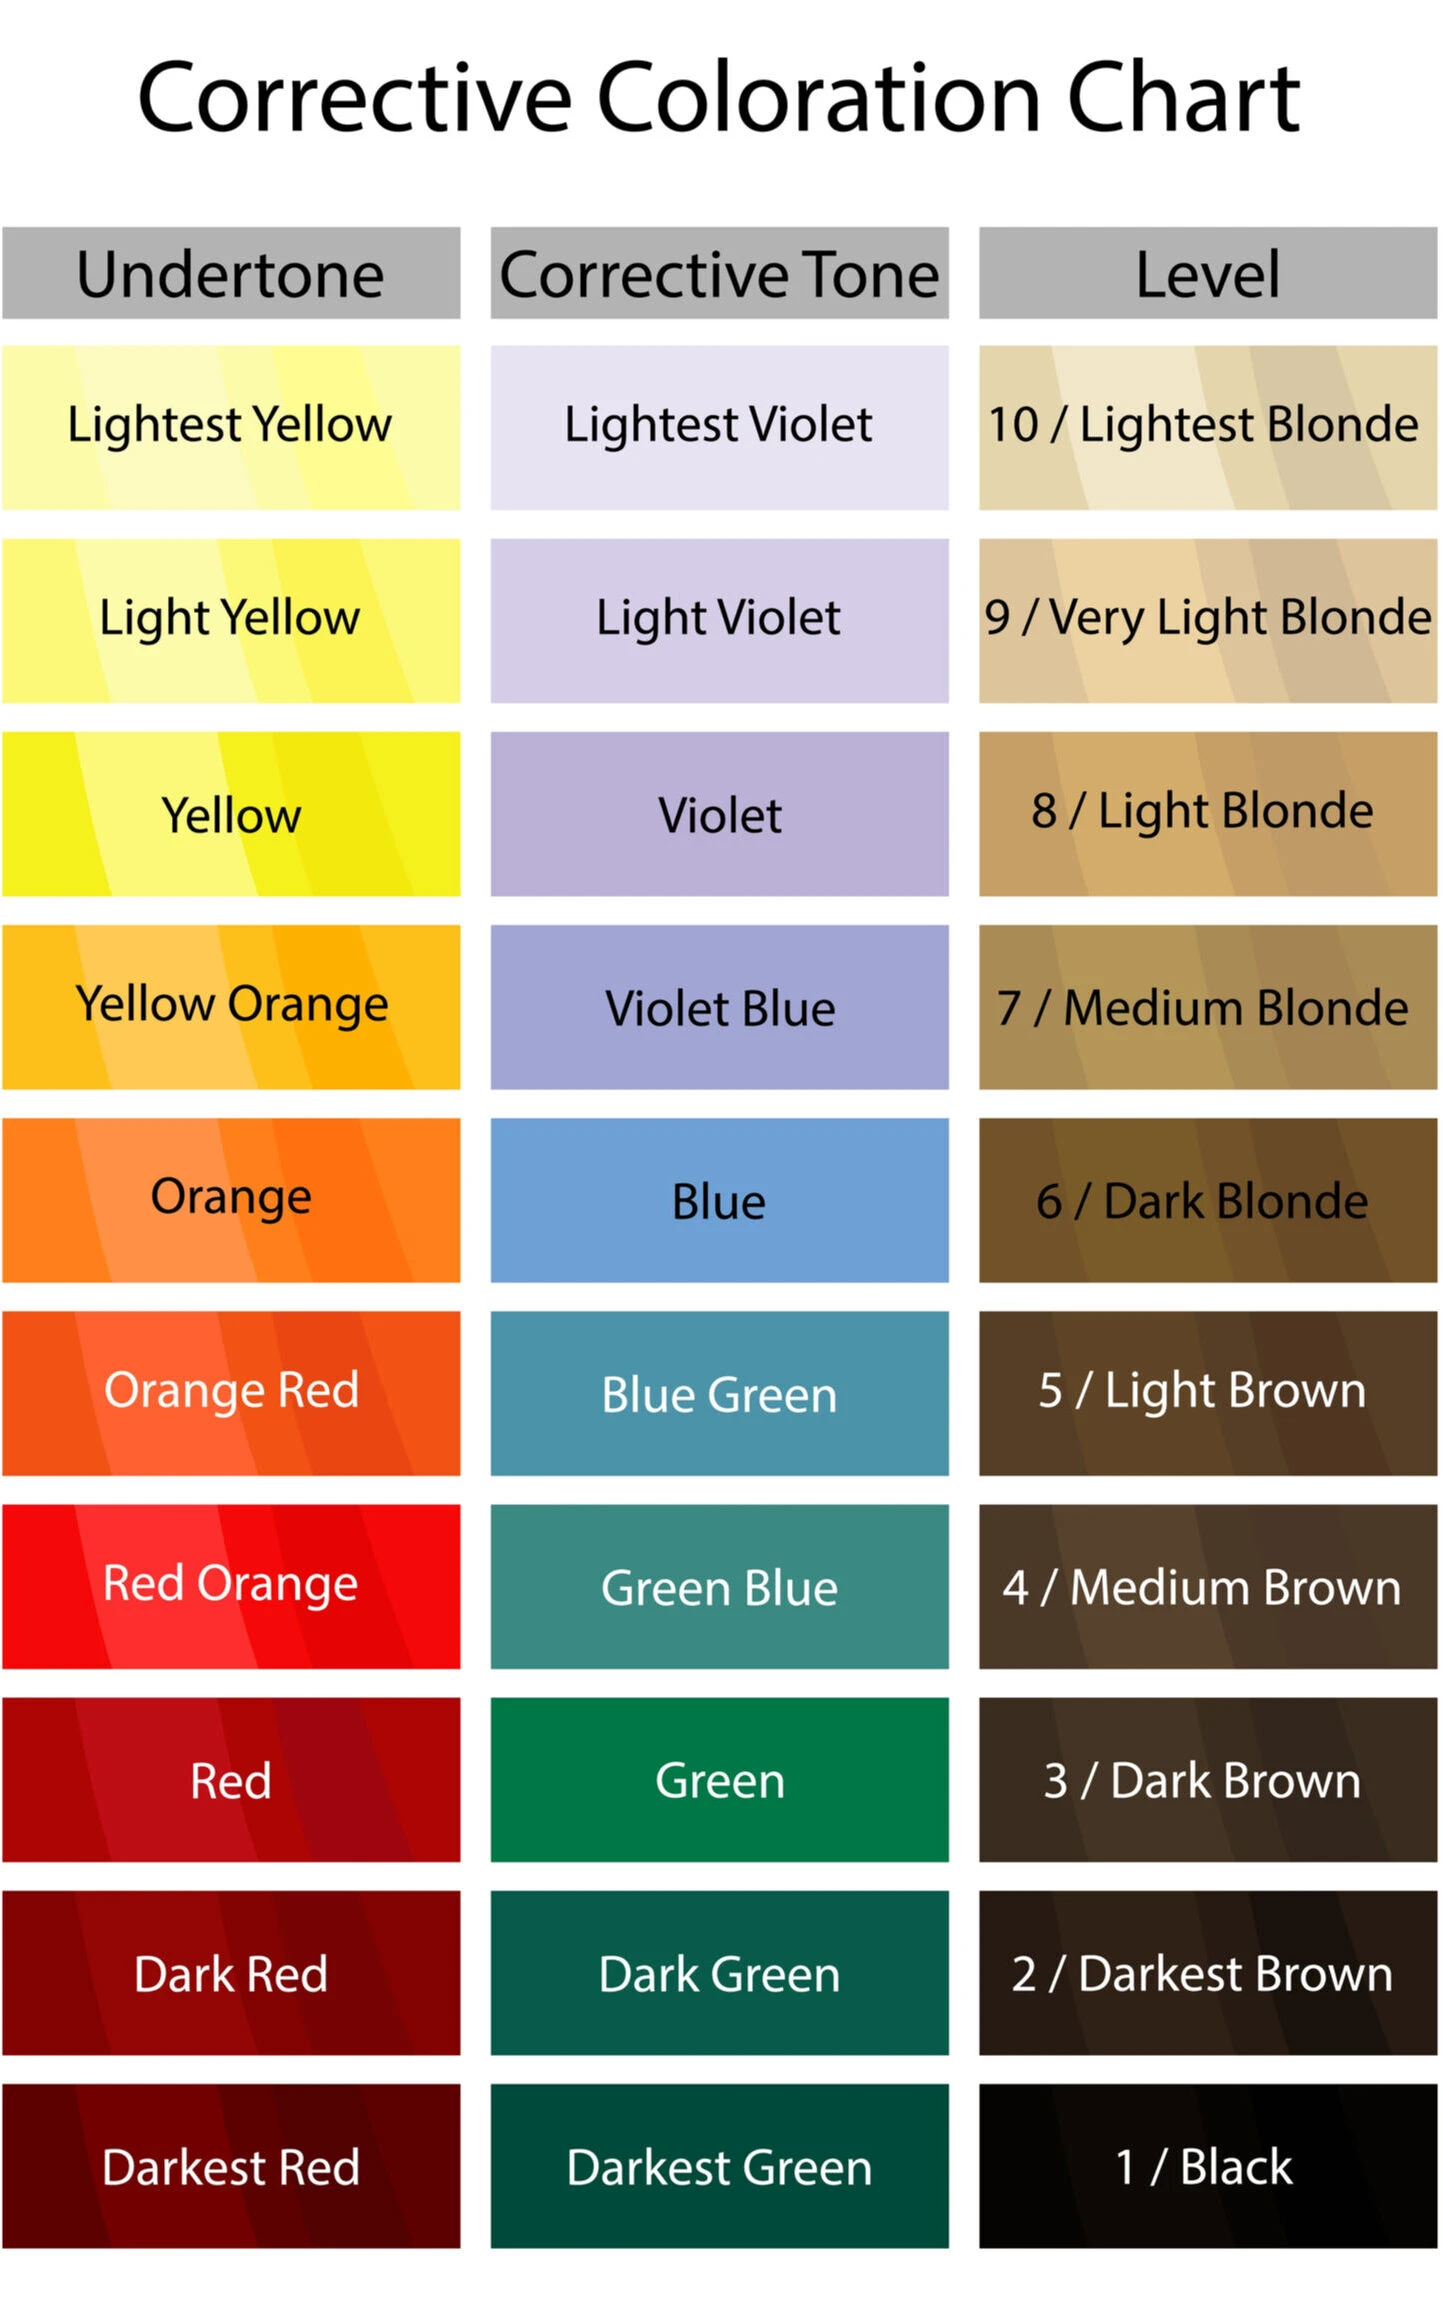 Corrective coloration chart for use in hair color theory